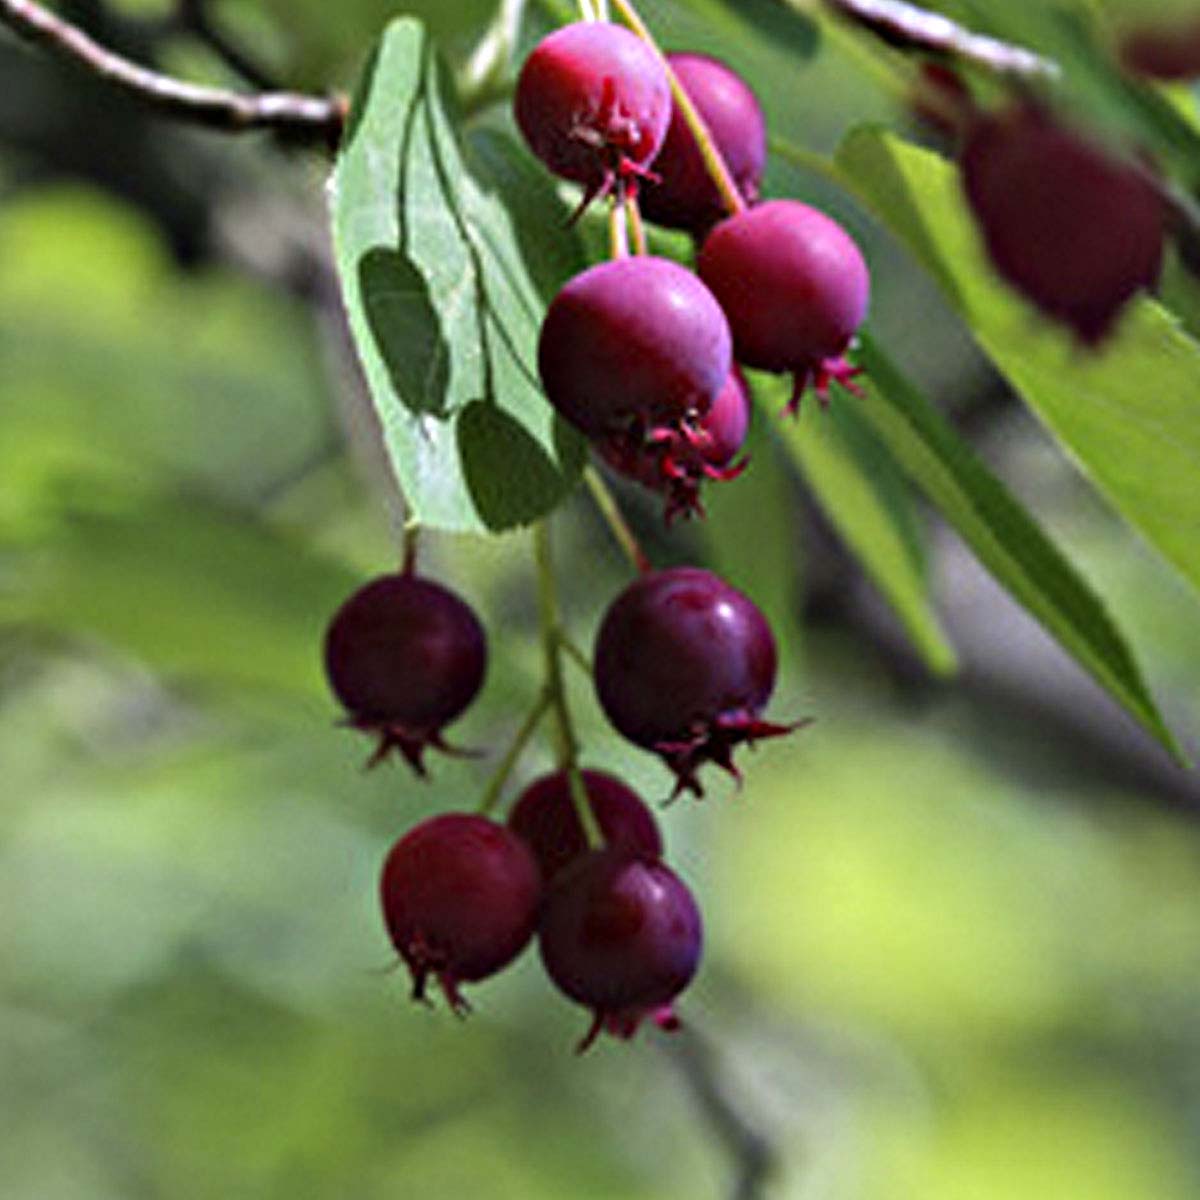 Cascade of serviceberries hanging from plant.